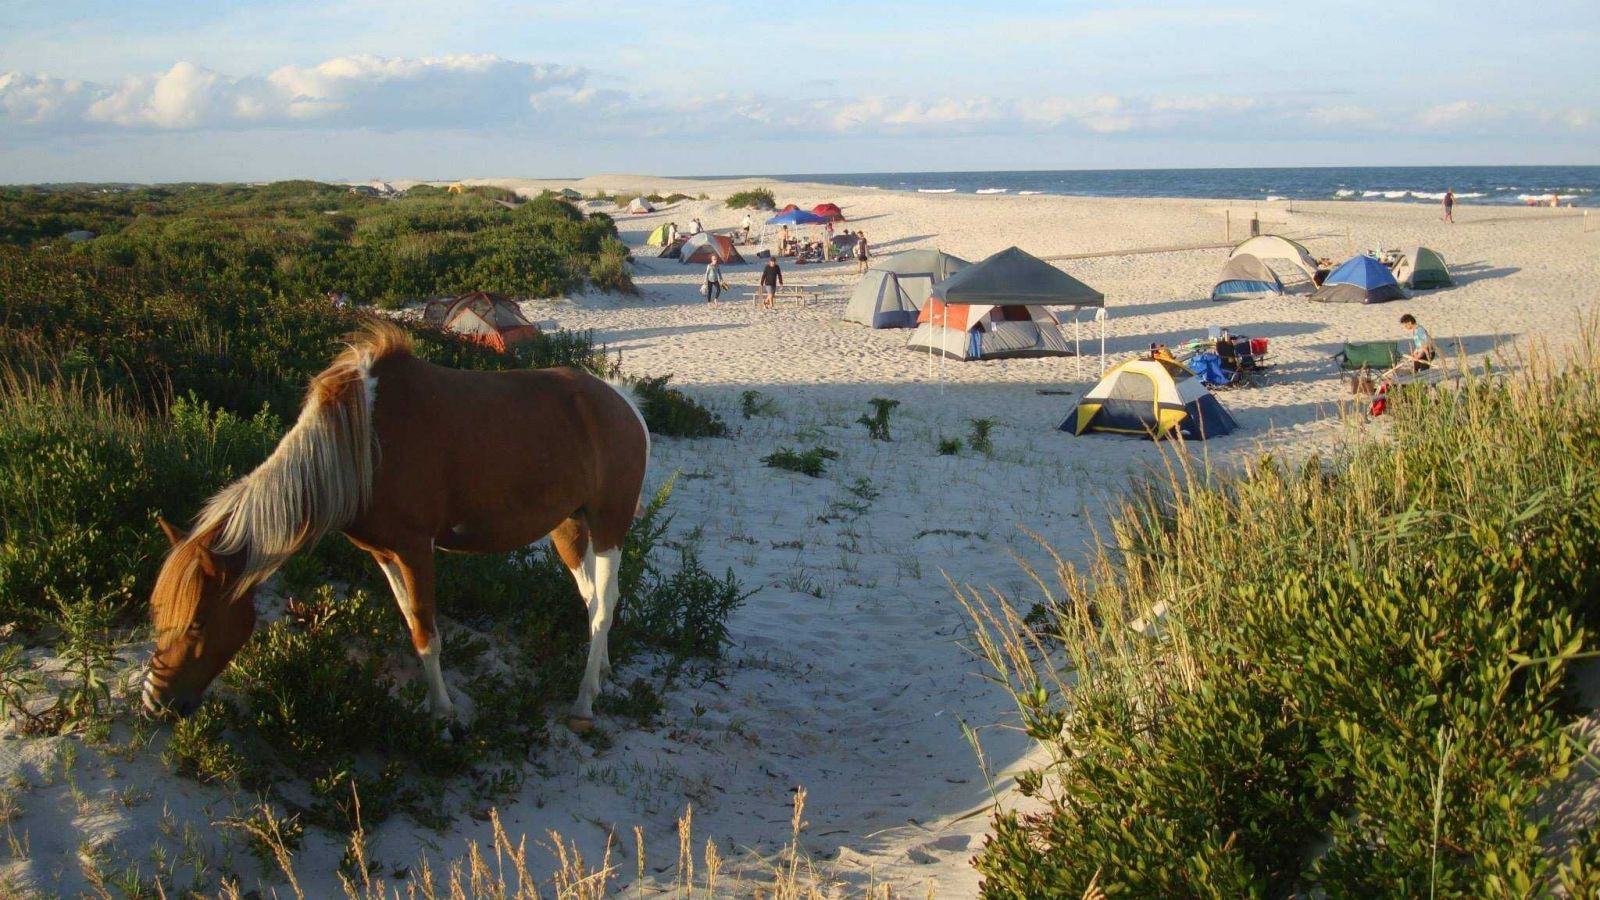 Ponies and camping on assateague island